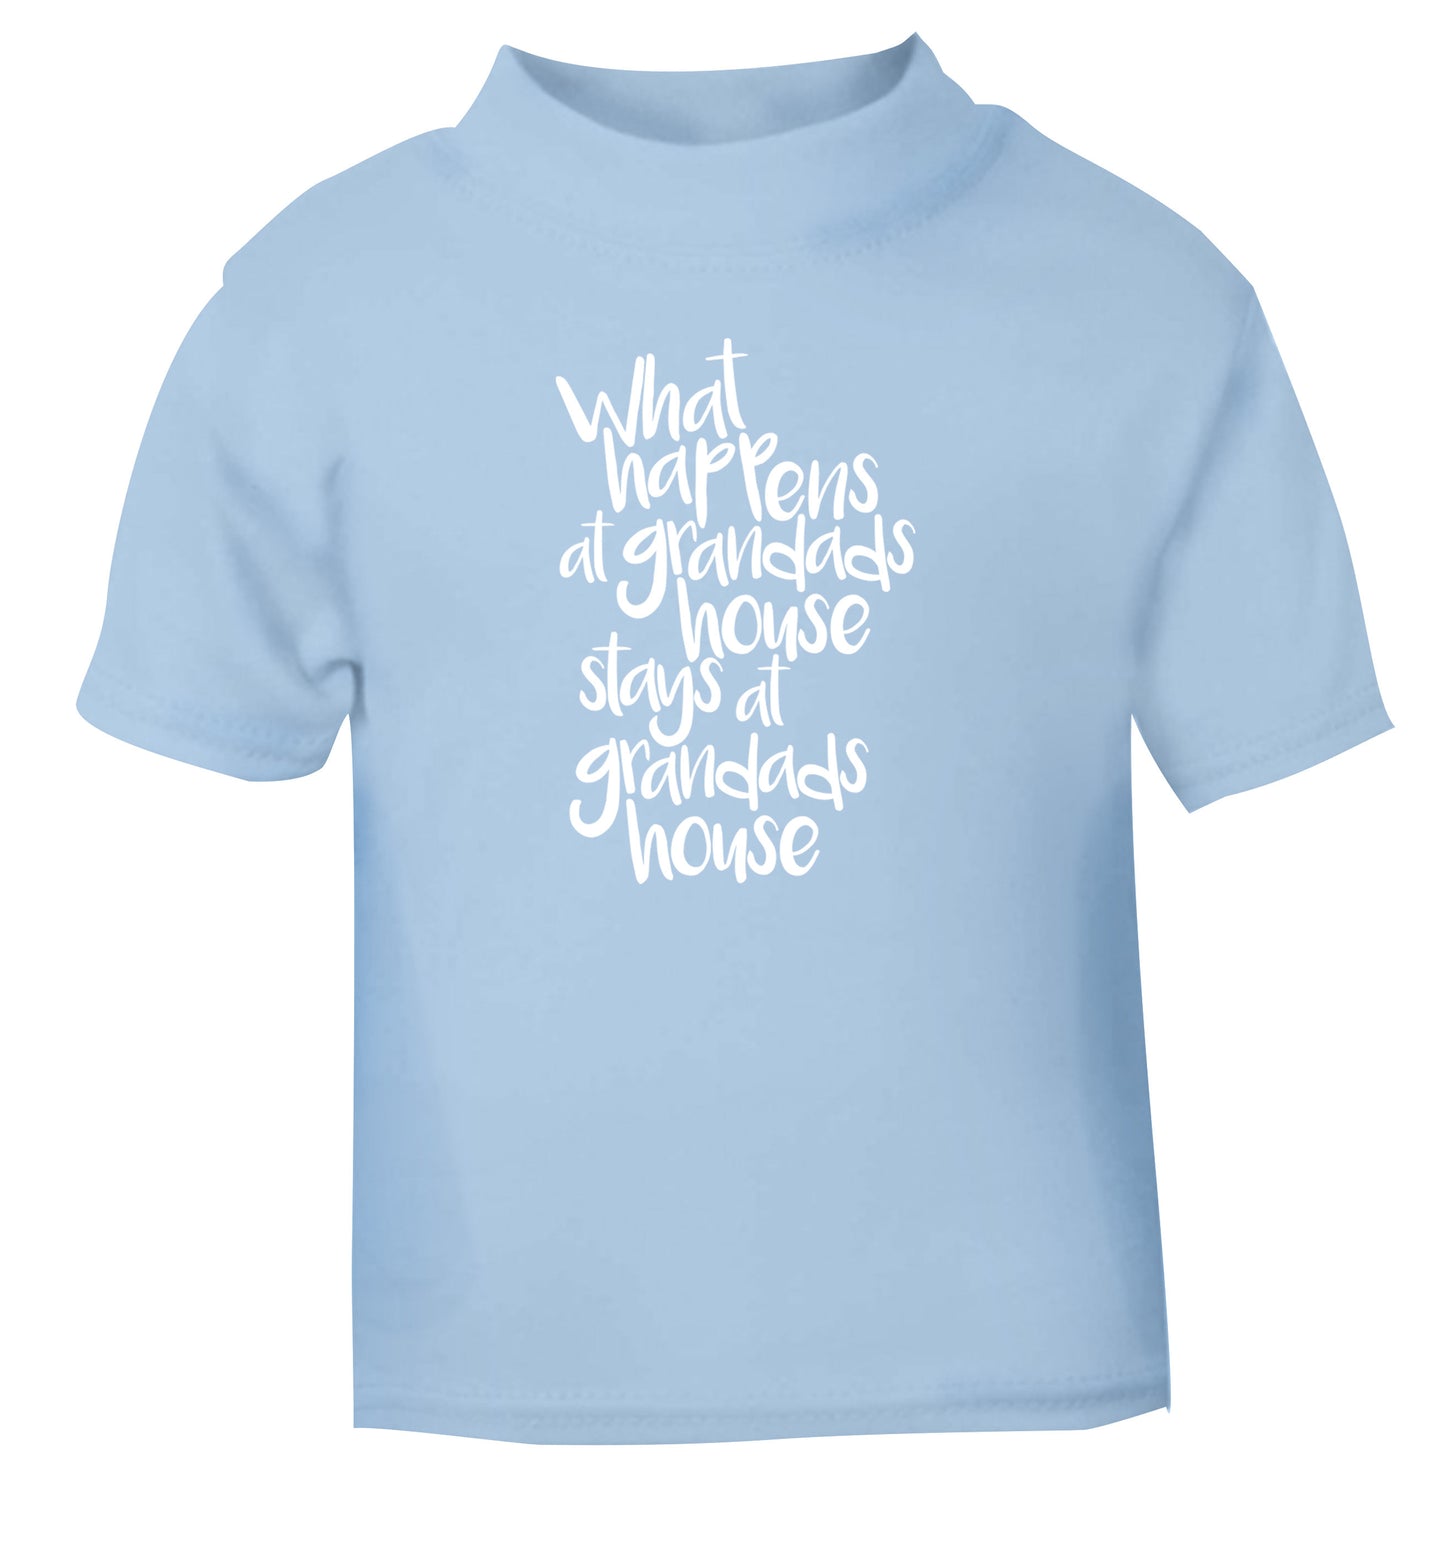 What happens at grandads house stays at grandads house light blue Baby Toddler Tshirt 2 Years